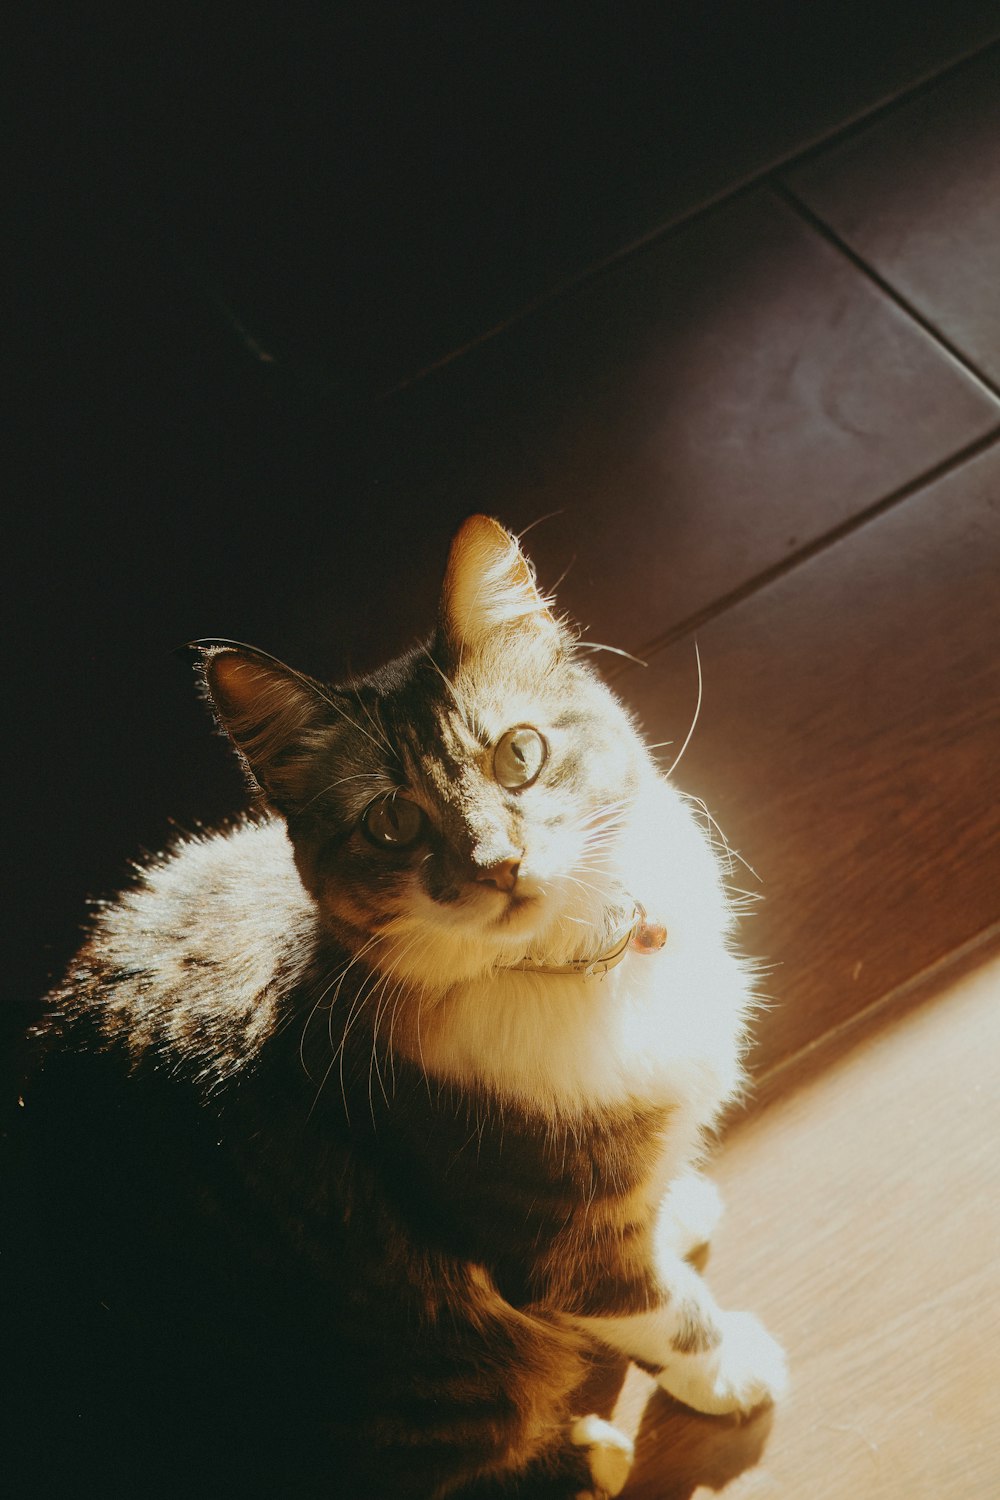 a cat sitting on a wooden floor looking at the camera